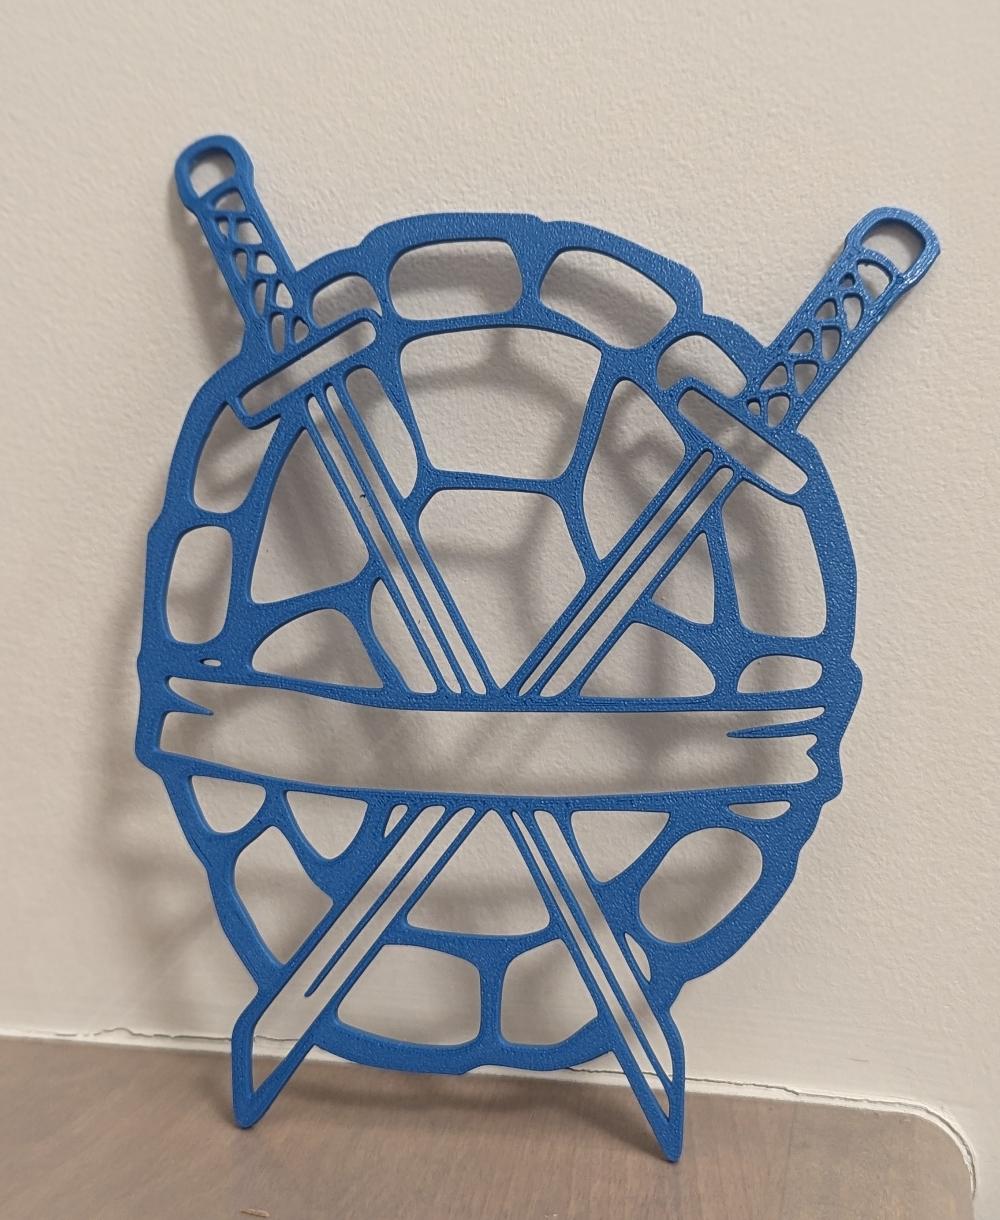 Leonardo  Teenage Mutant Ninja Turtles 2D-Art.3mf - Came out great! A little bit of warping at the handles but it still printed successfully. - 3d model